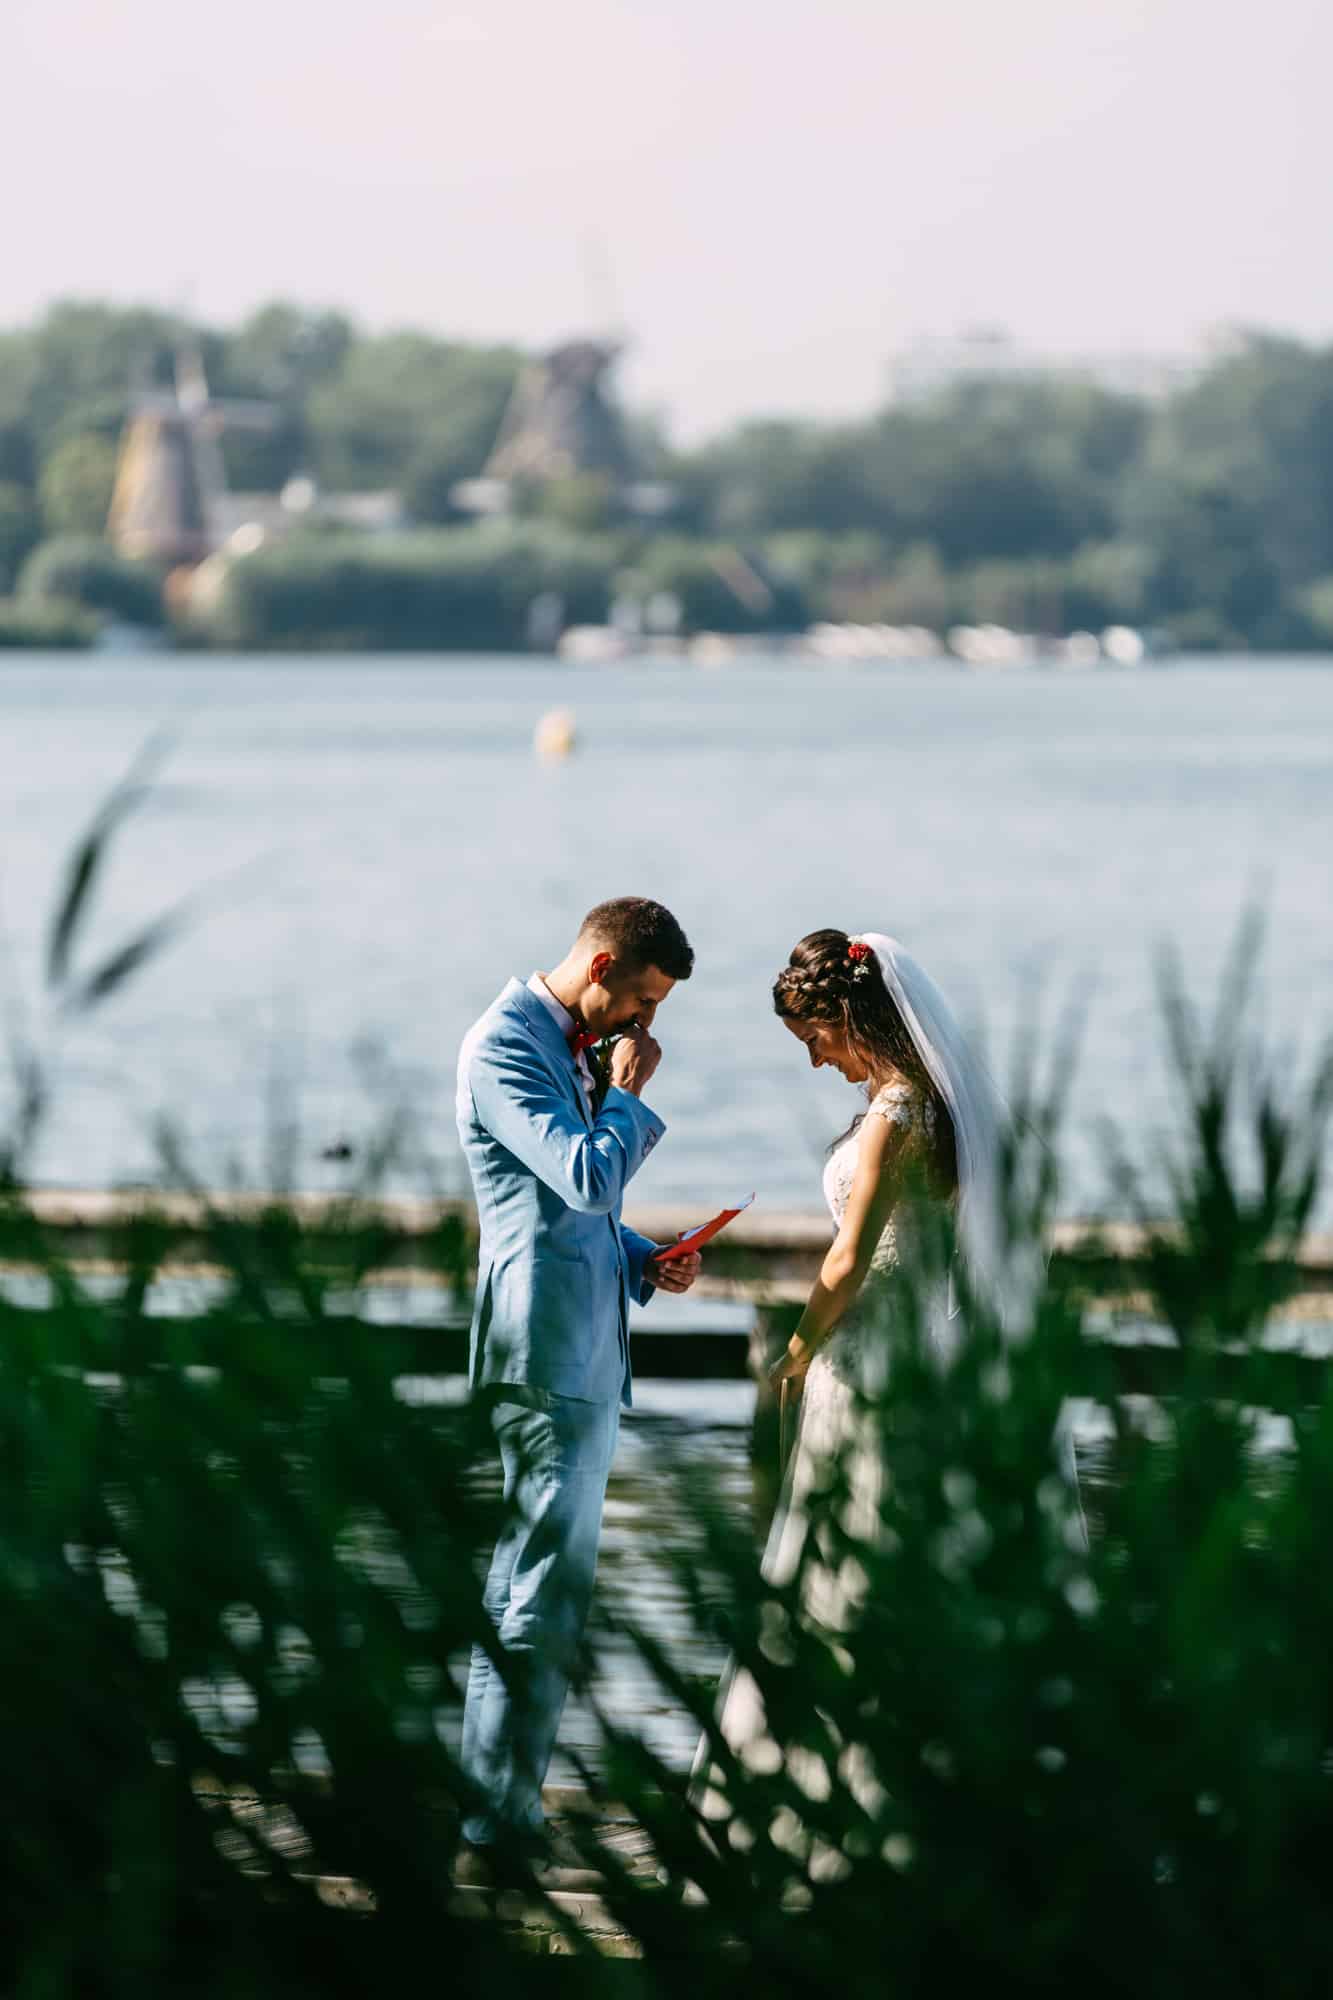 A bride and groom exchanging wedding vows on a quay beside a calm water.